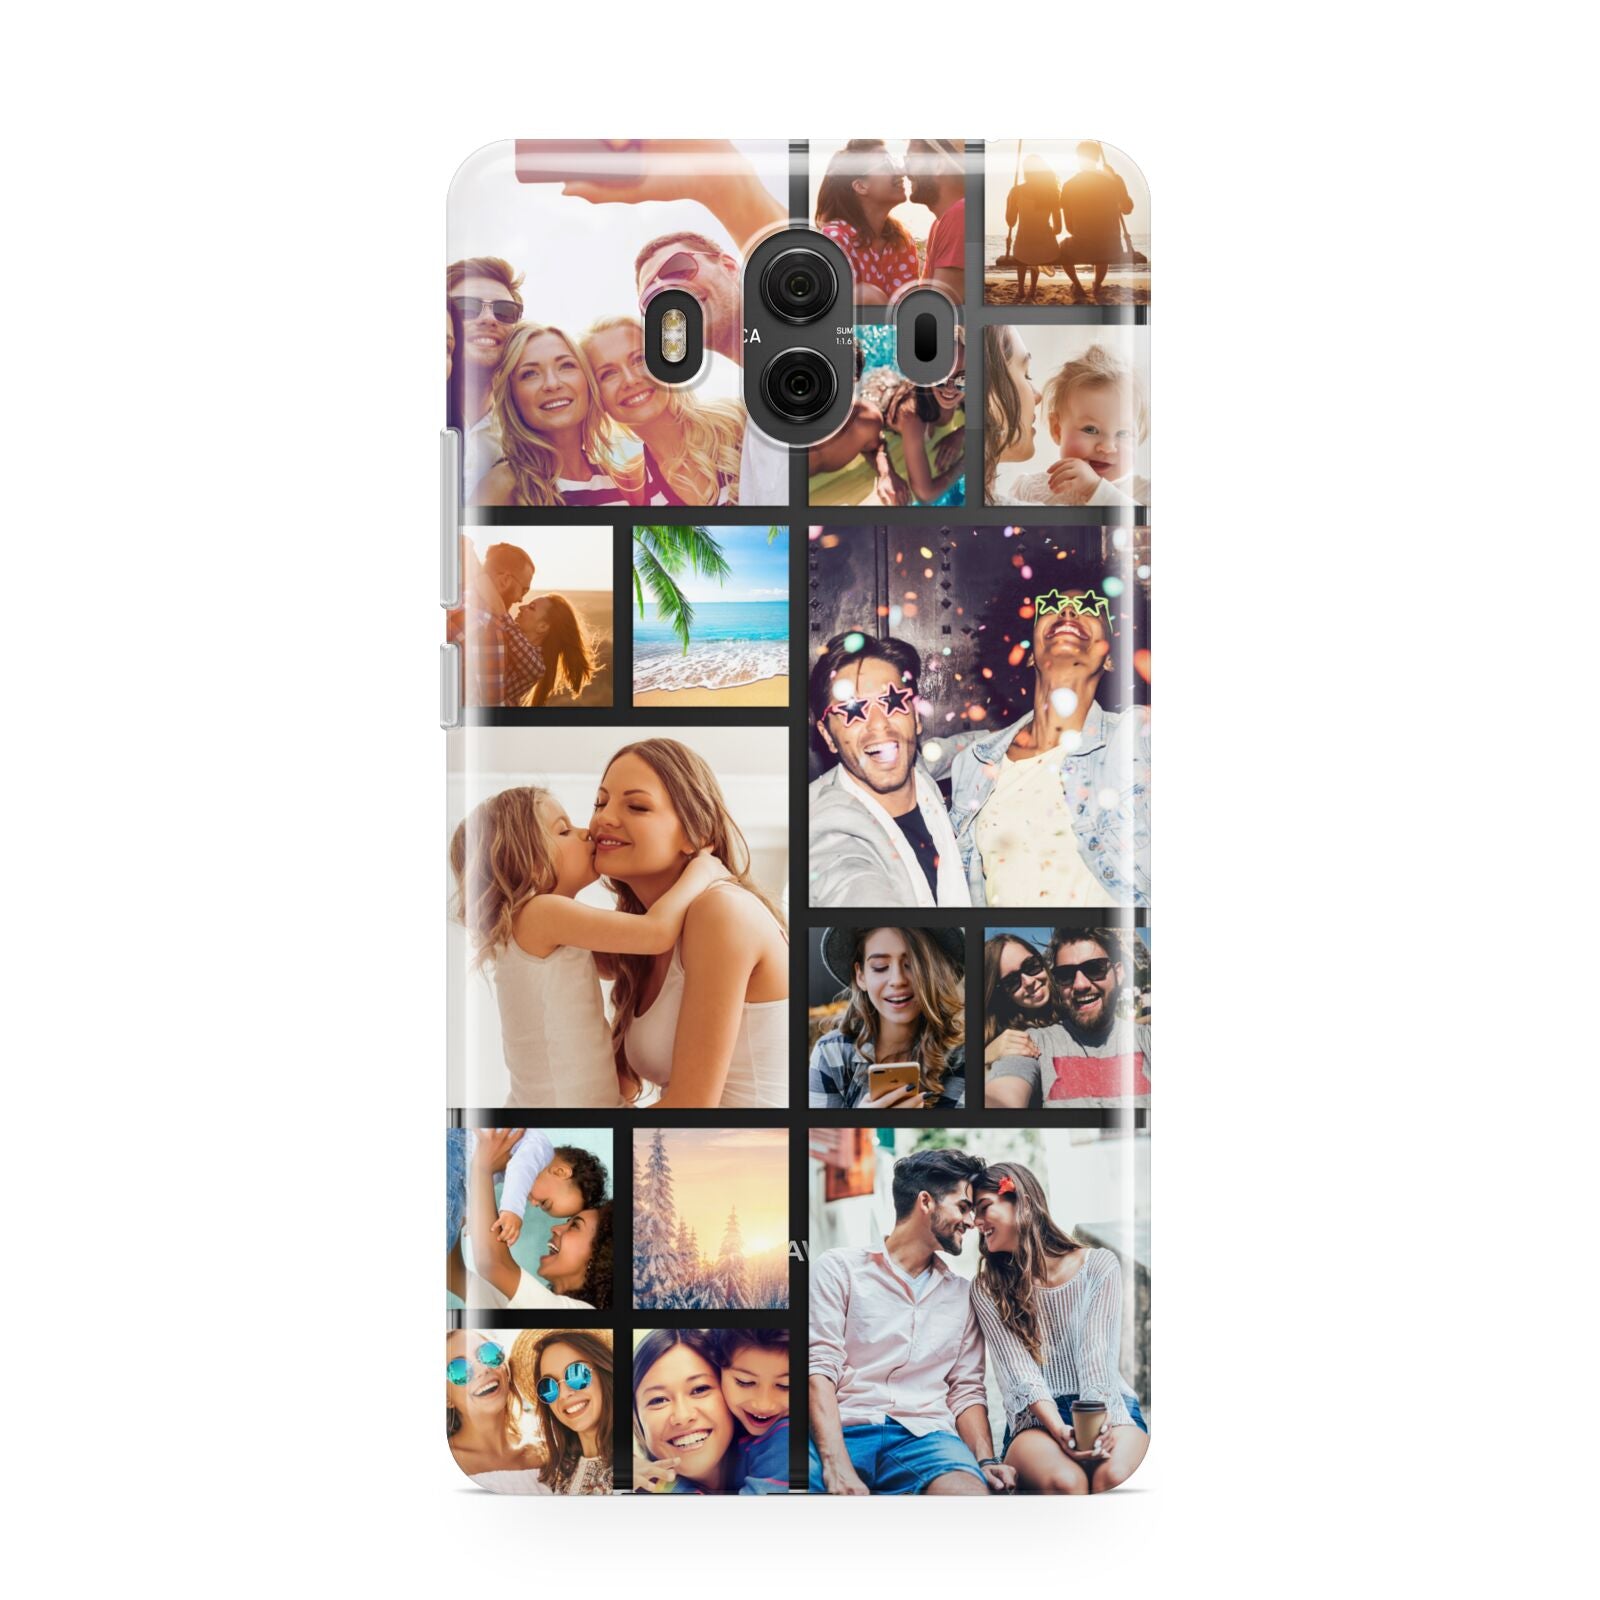 Abstract Multi Tile Photo Montage Upload Huawei Mate 10 Protective Phone Case